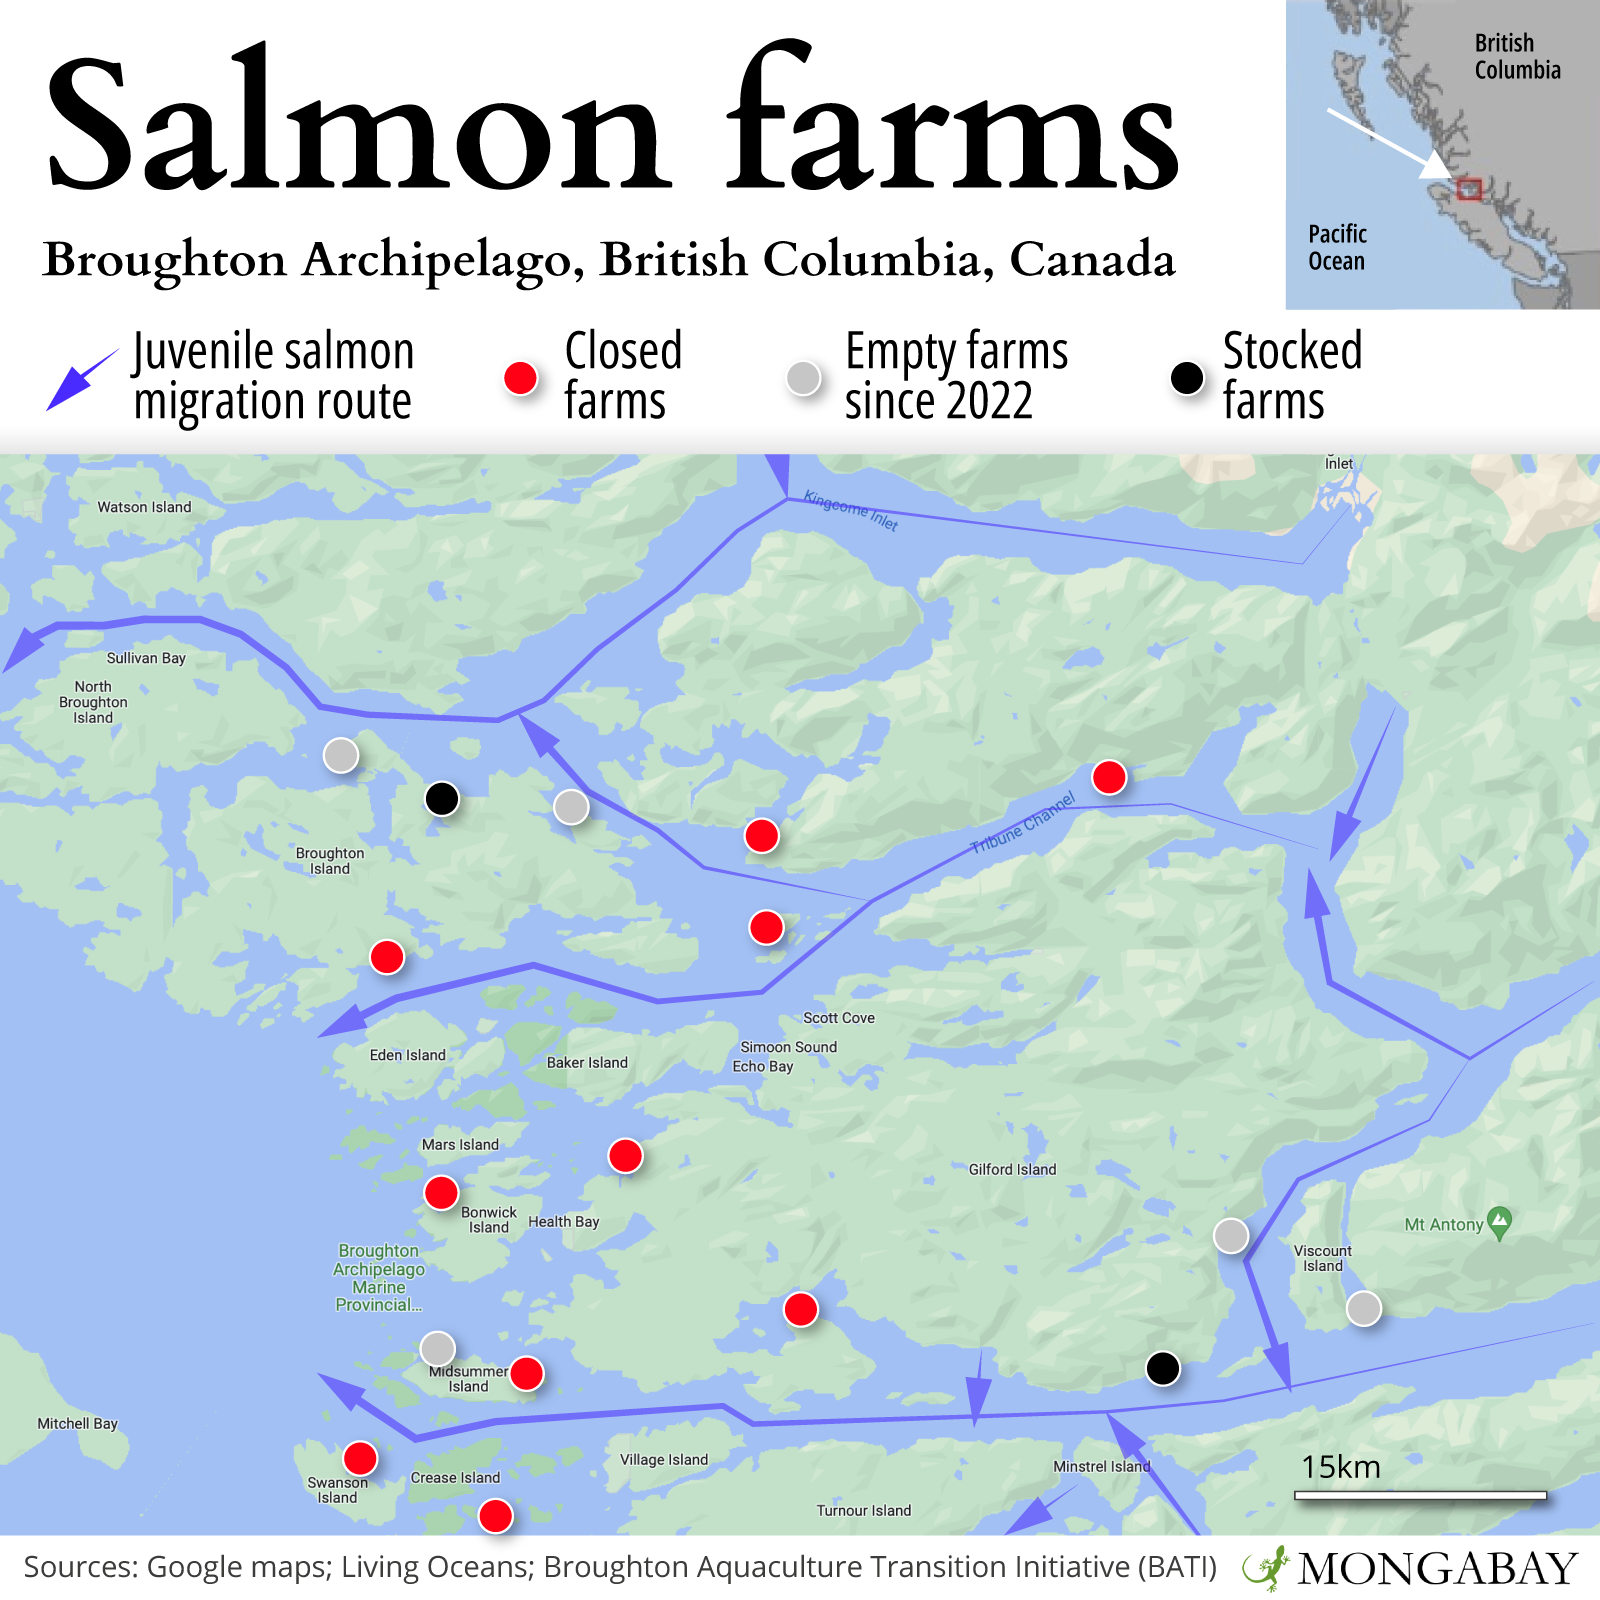 Map of salmon farms that are closed, open or under deliberation at the Broughton Archipelago, British Colombia, Canada.